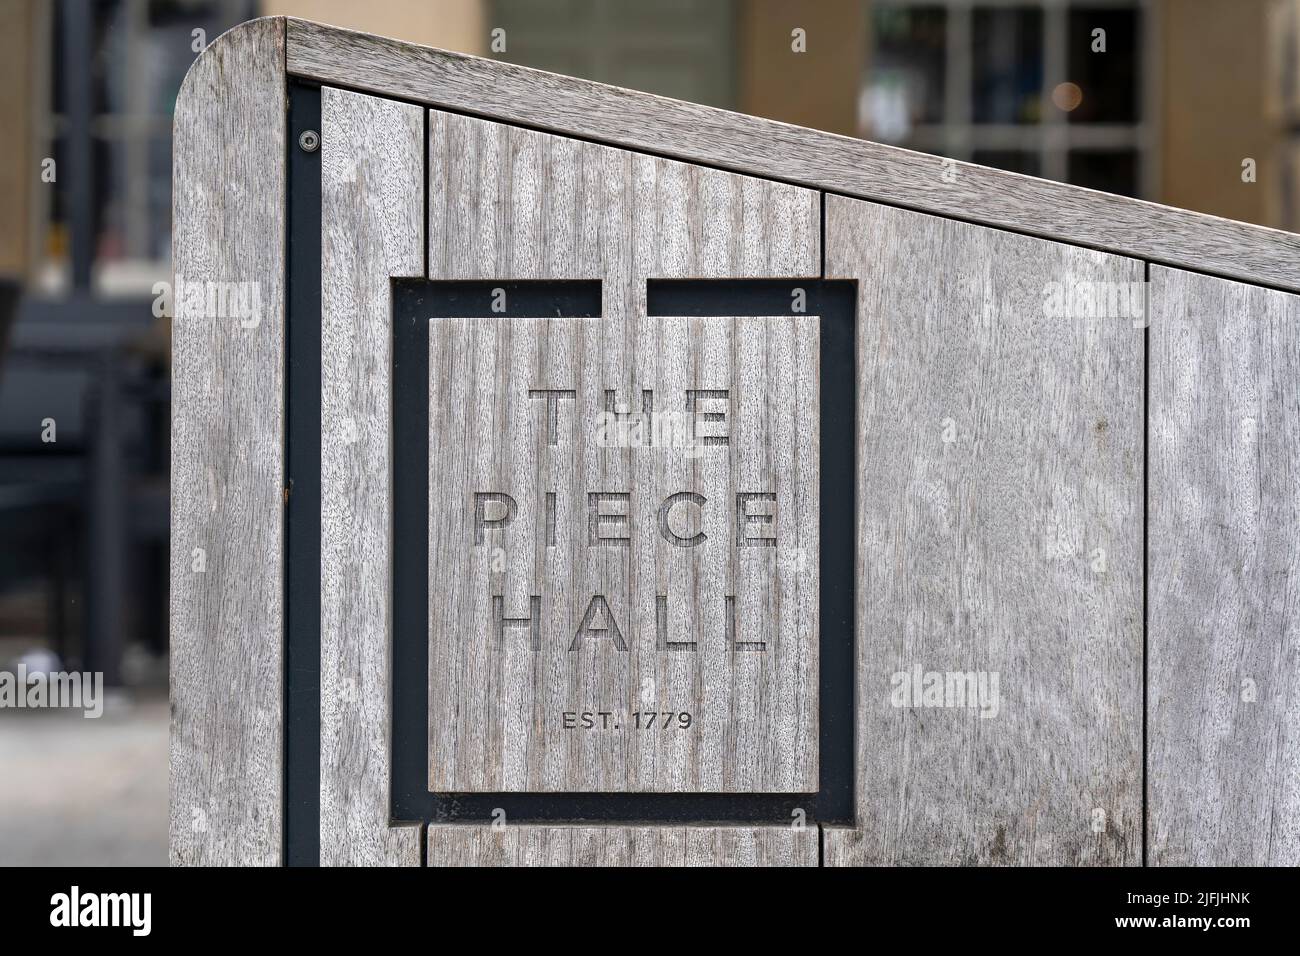 The Piece Hall Wooden Sign in Halifax Yorkshire Stock Photo